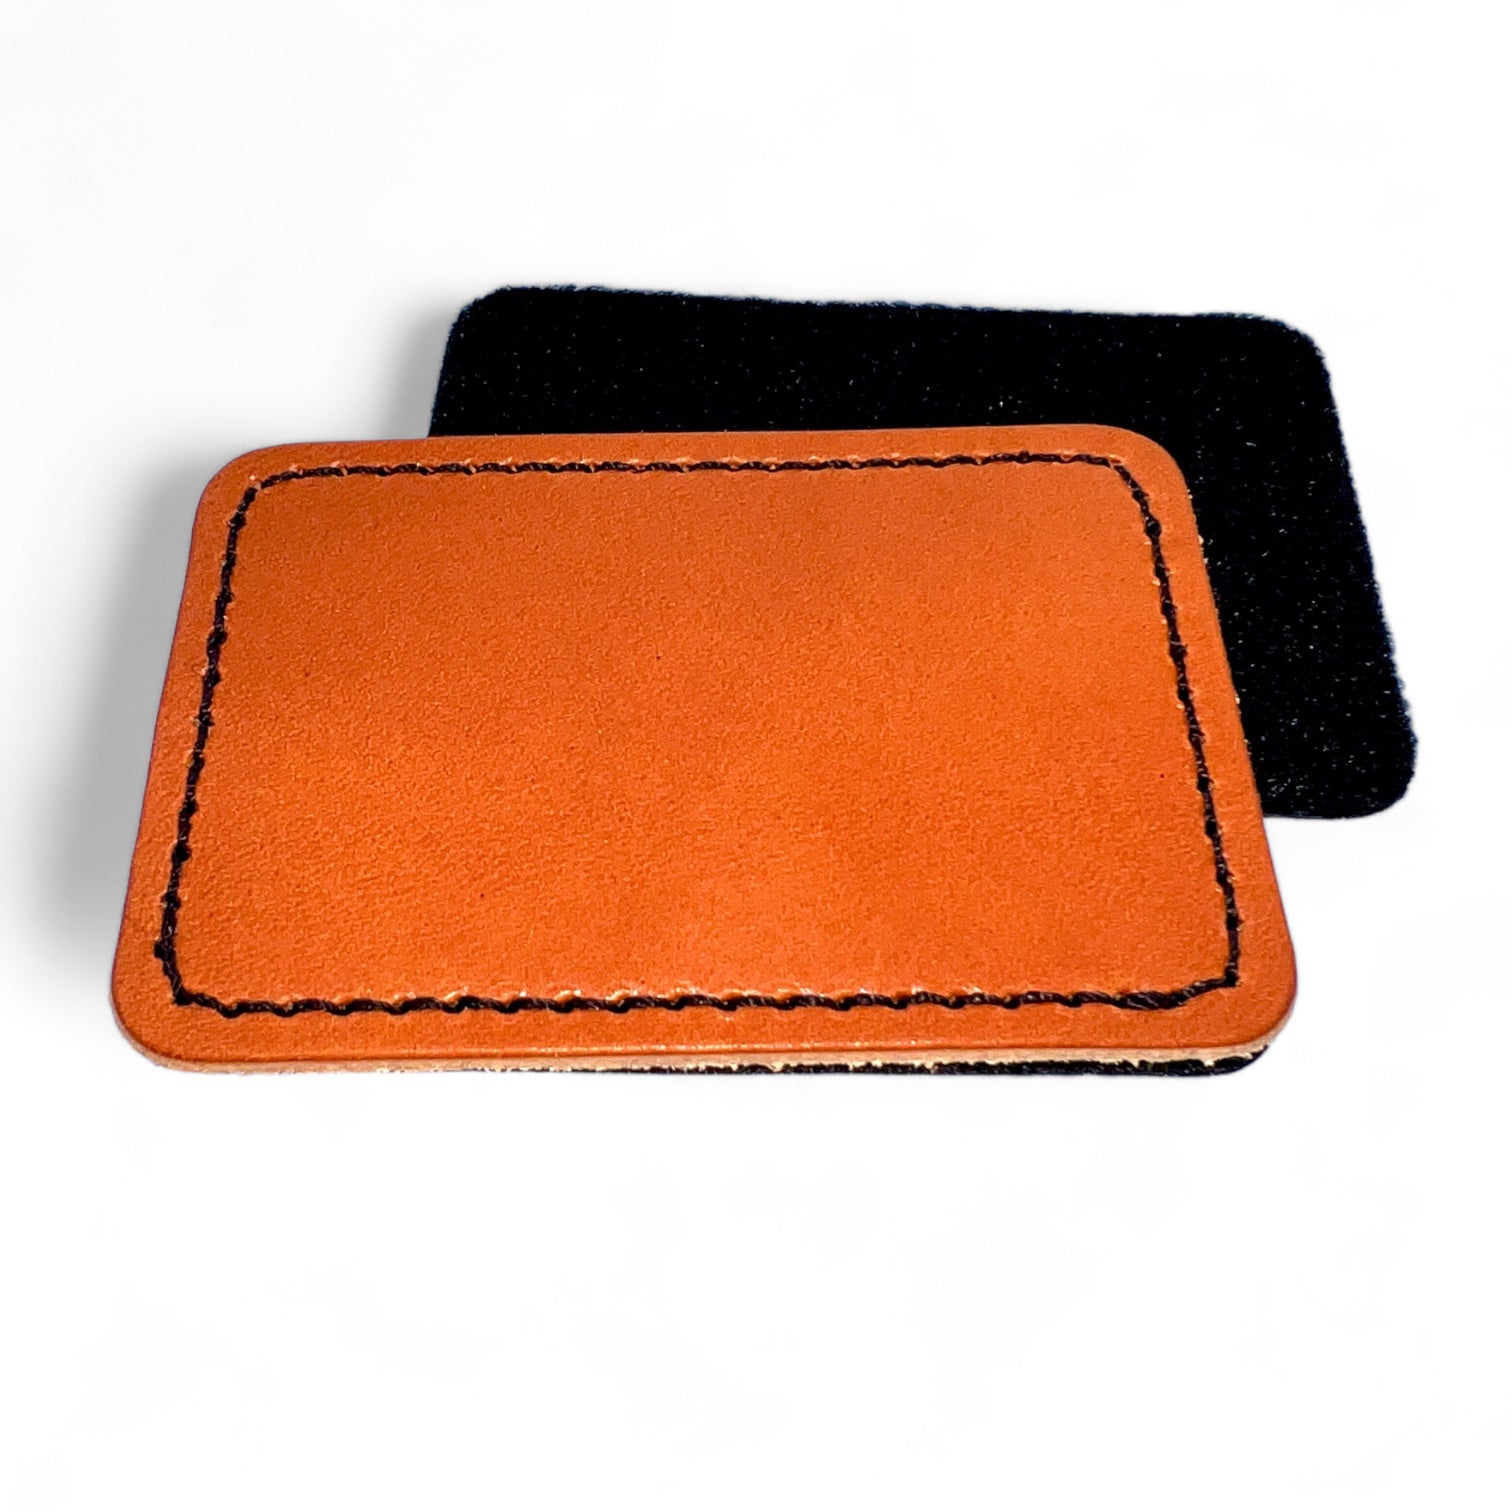 Limousin Brown Stitched Leather Hook & Loop Patches - #LoneStar Adhesive#